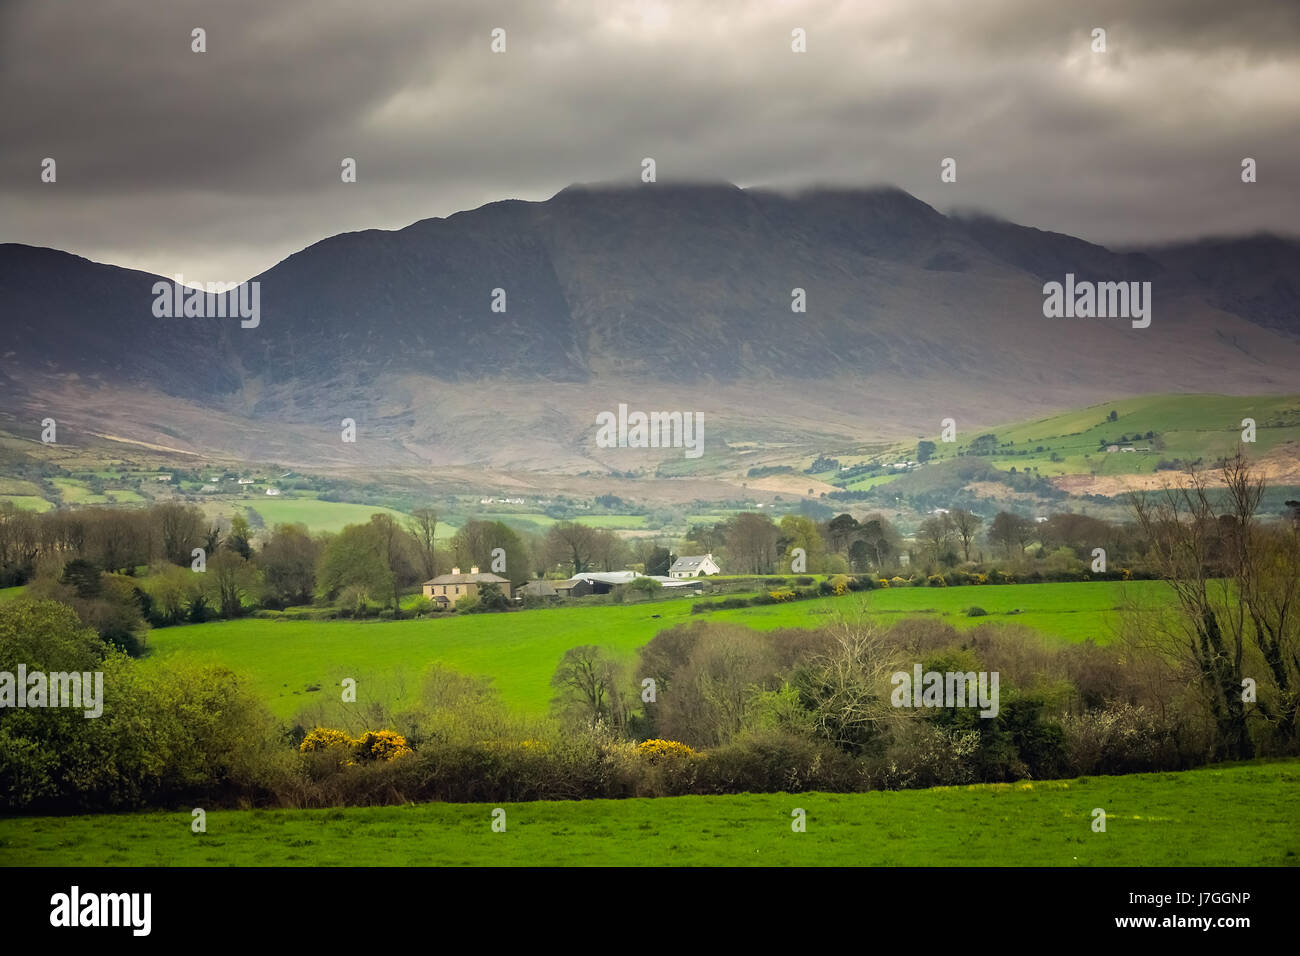 Farm and fields in the rural Irish landscape, Kerry county, Ireland Stock Photo